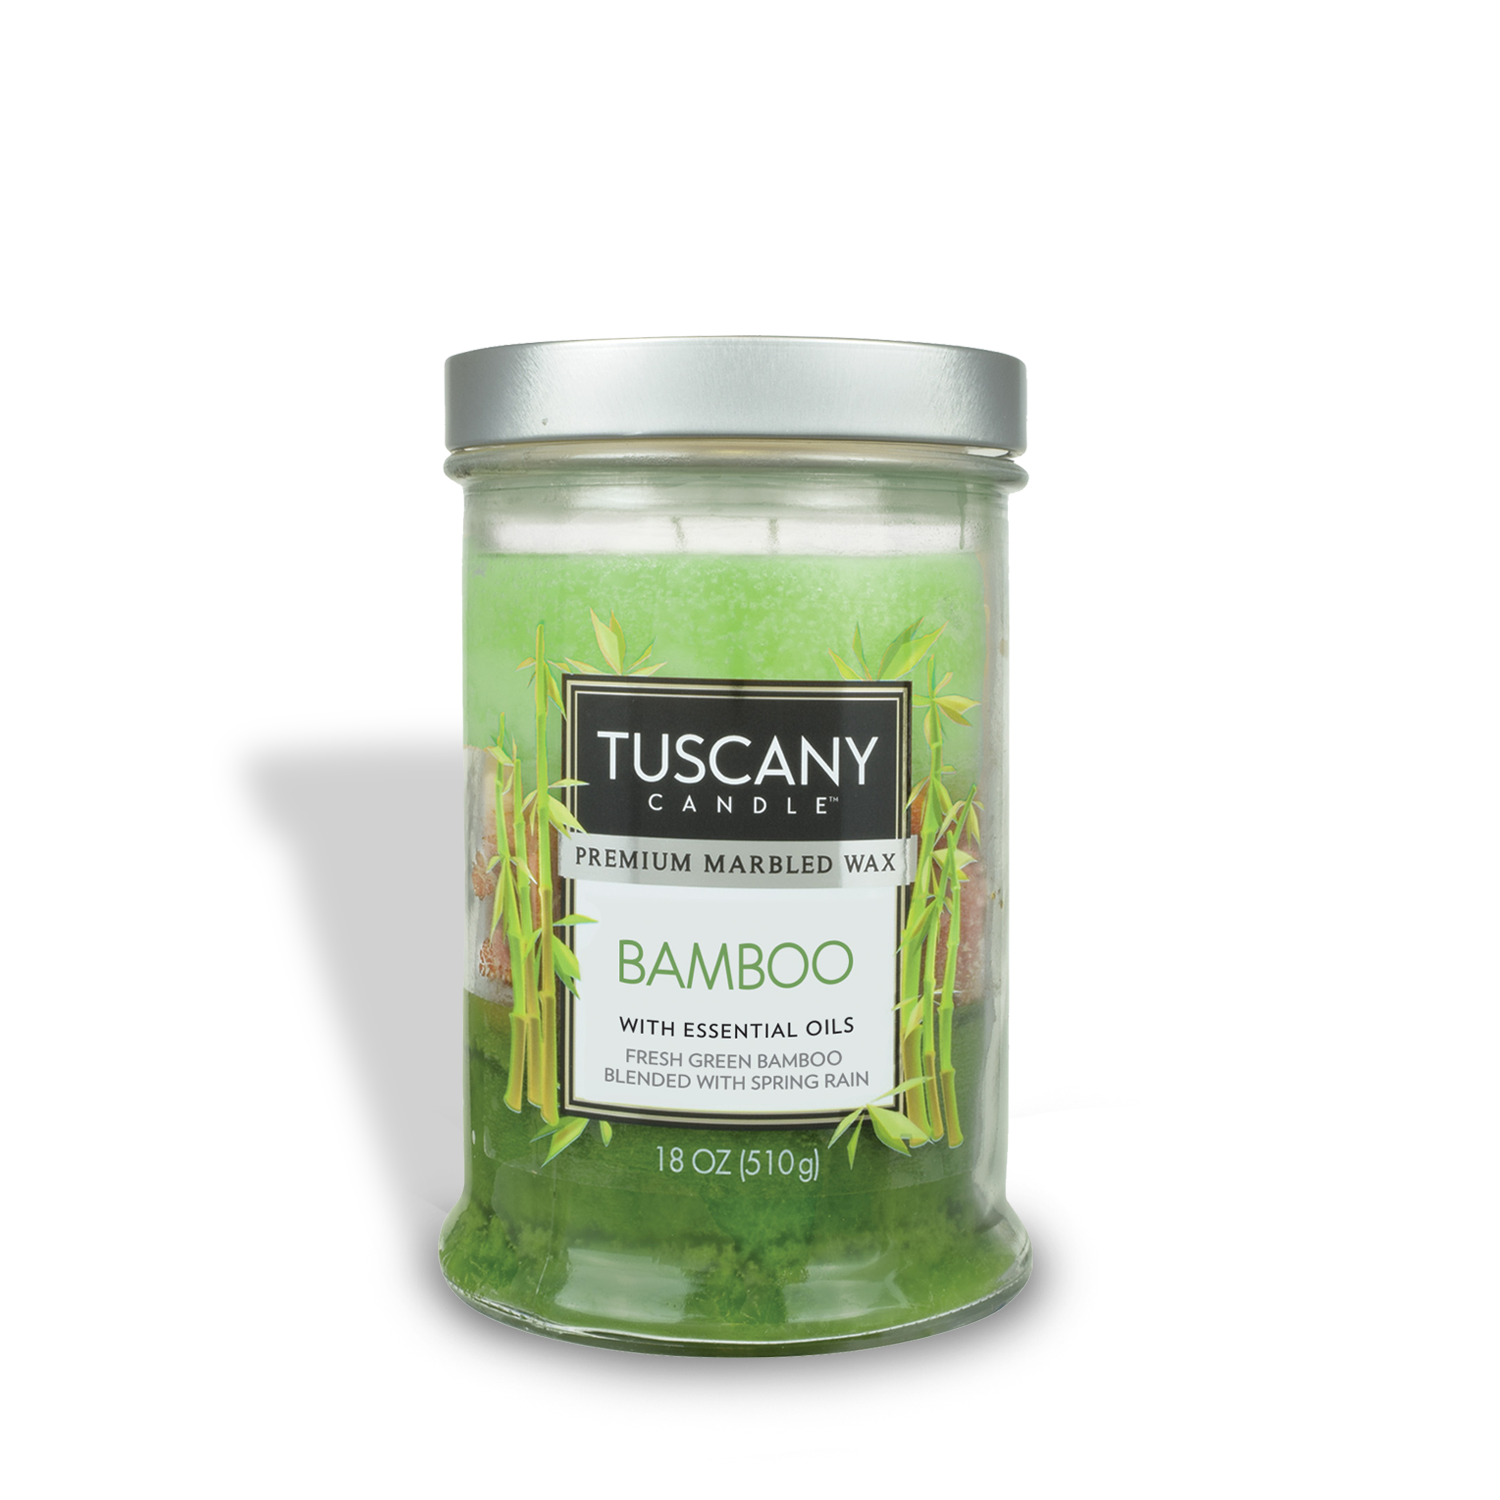 Fresh Bamboo Long-Lasting Scented Jar Candle (18 oz) with marbled wax design in a glass jar by Tuscany Candle® EVD.